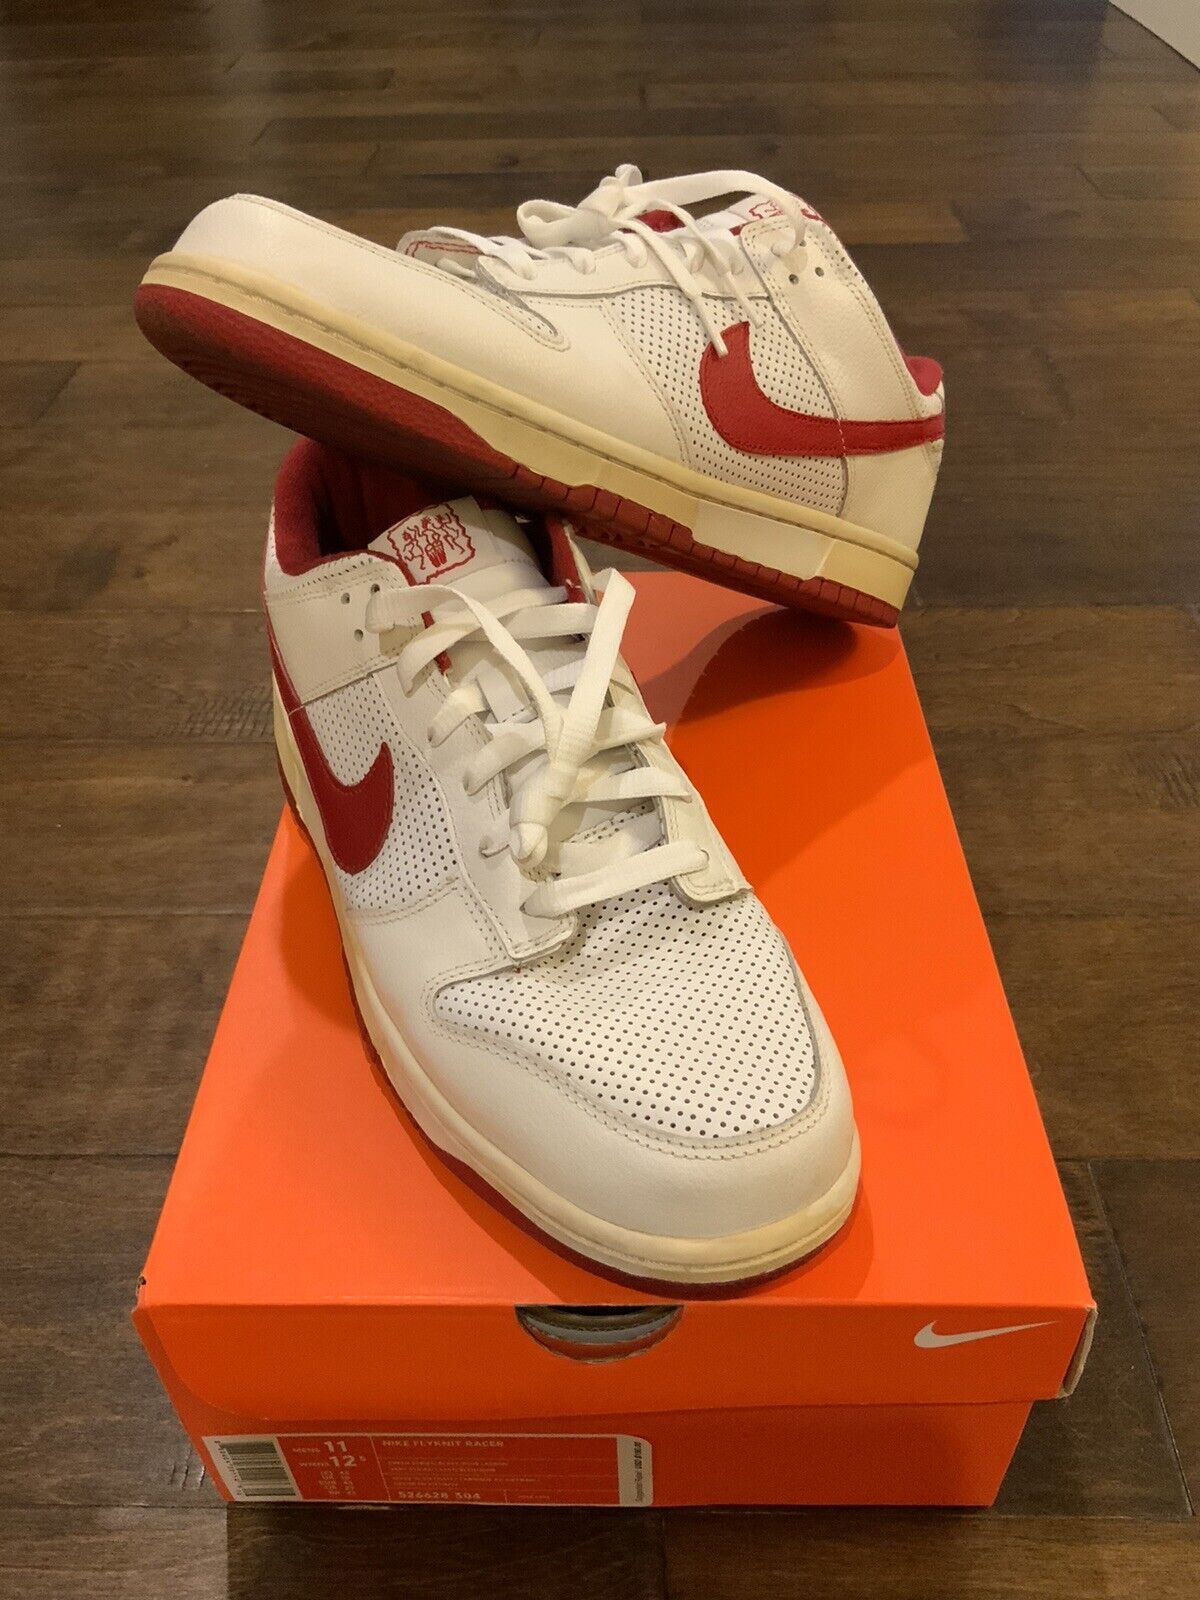 2005 Rare Nike Dunk Low Retro “Drum Island Pack” Red/White Size 11